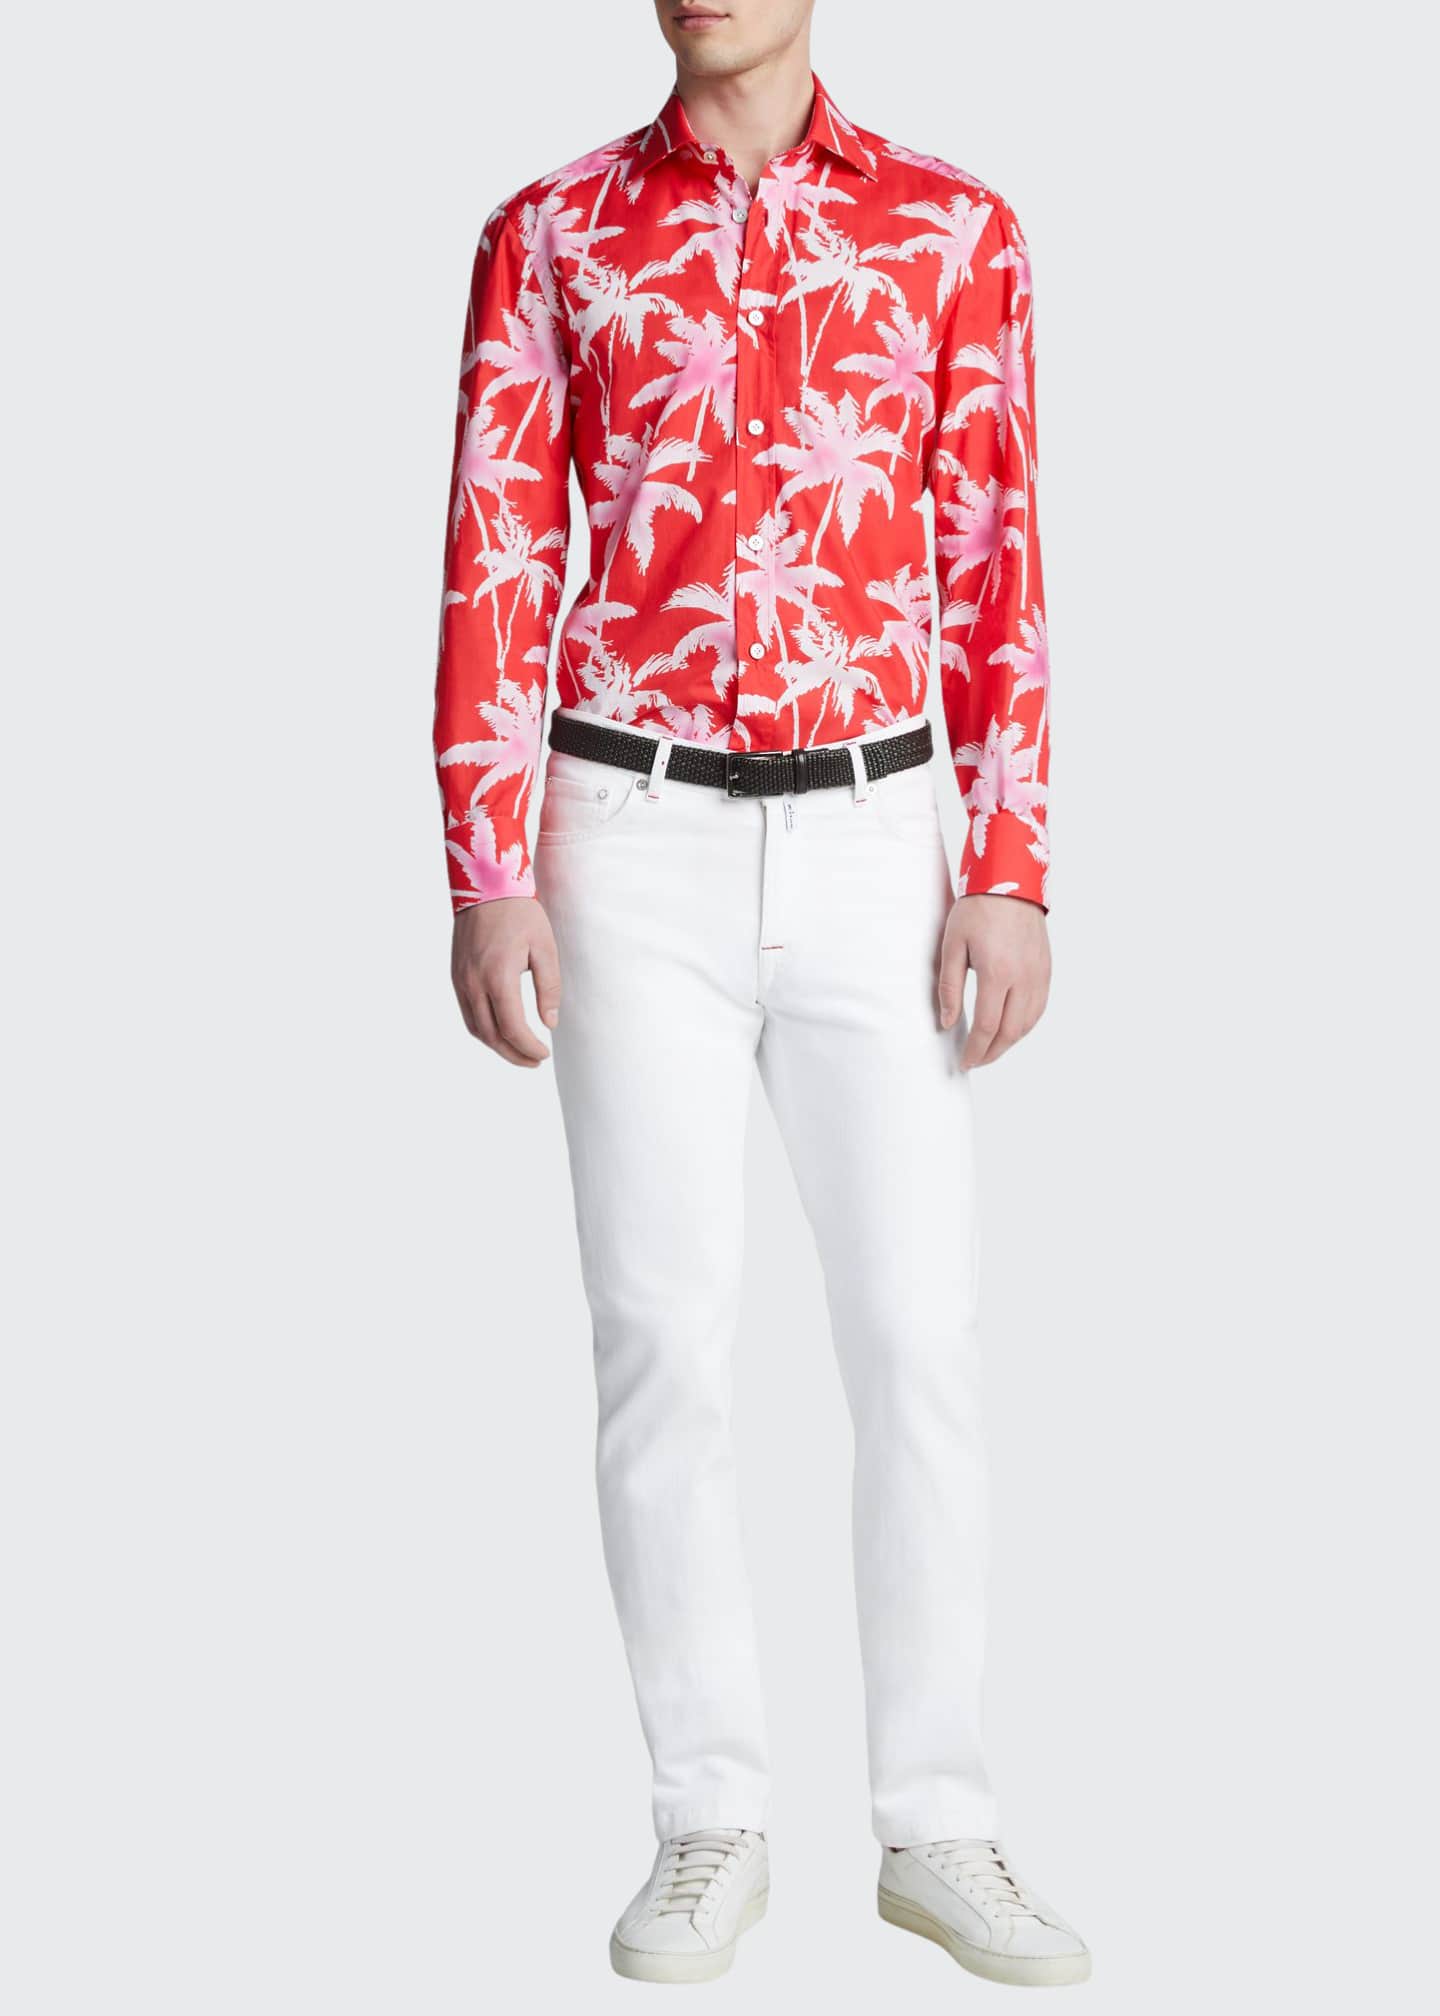 Levi's Mens Relaxed Fit CLASSIC Tropical ALDO Shirt Small BRAND NEW $54.50